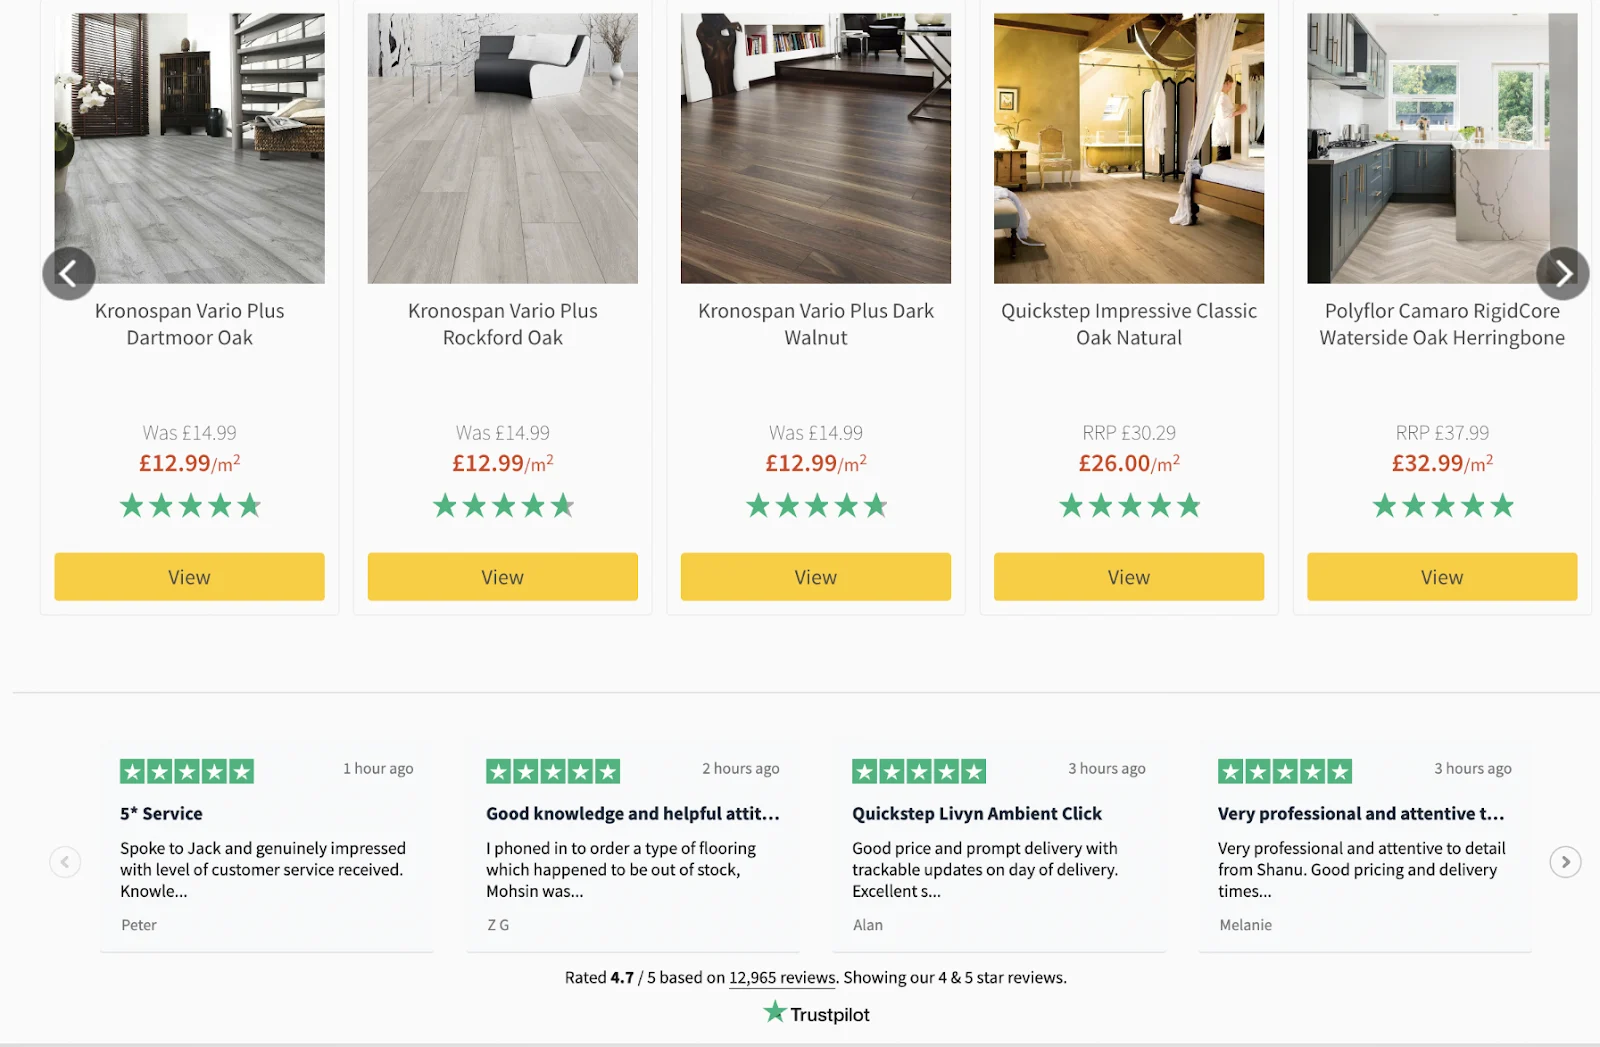 A feed of the latest Trustpilot reviews on their site’s footer.